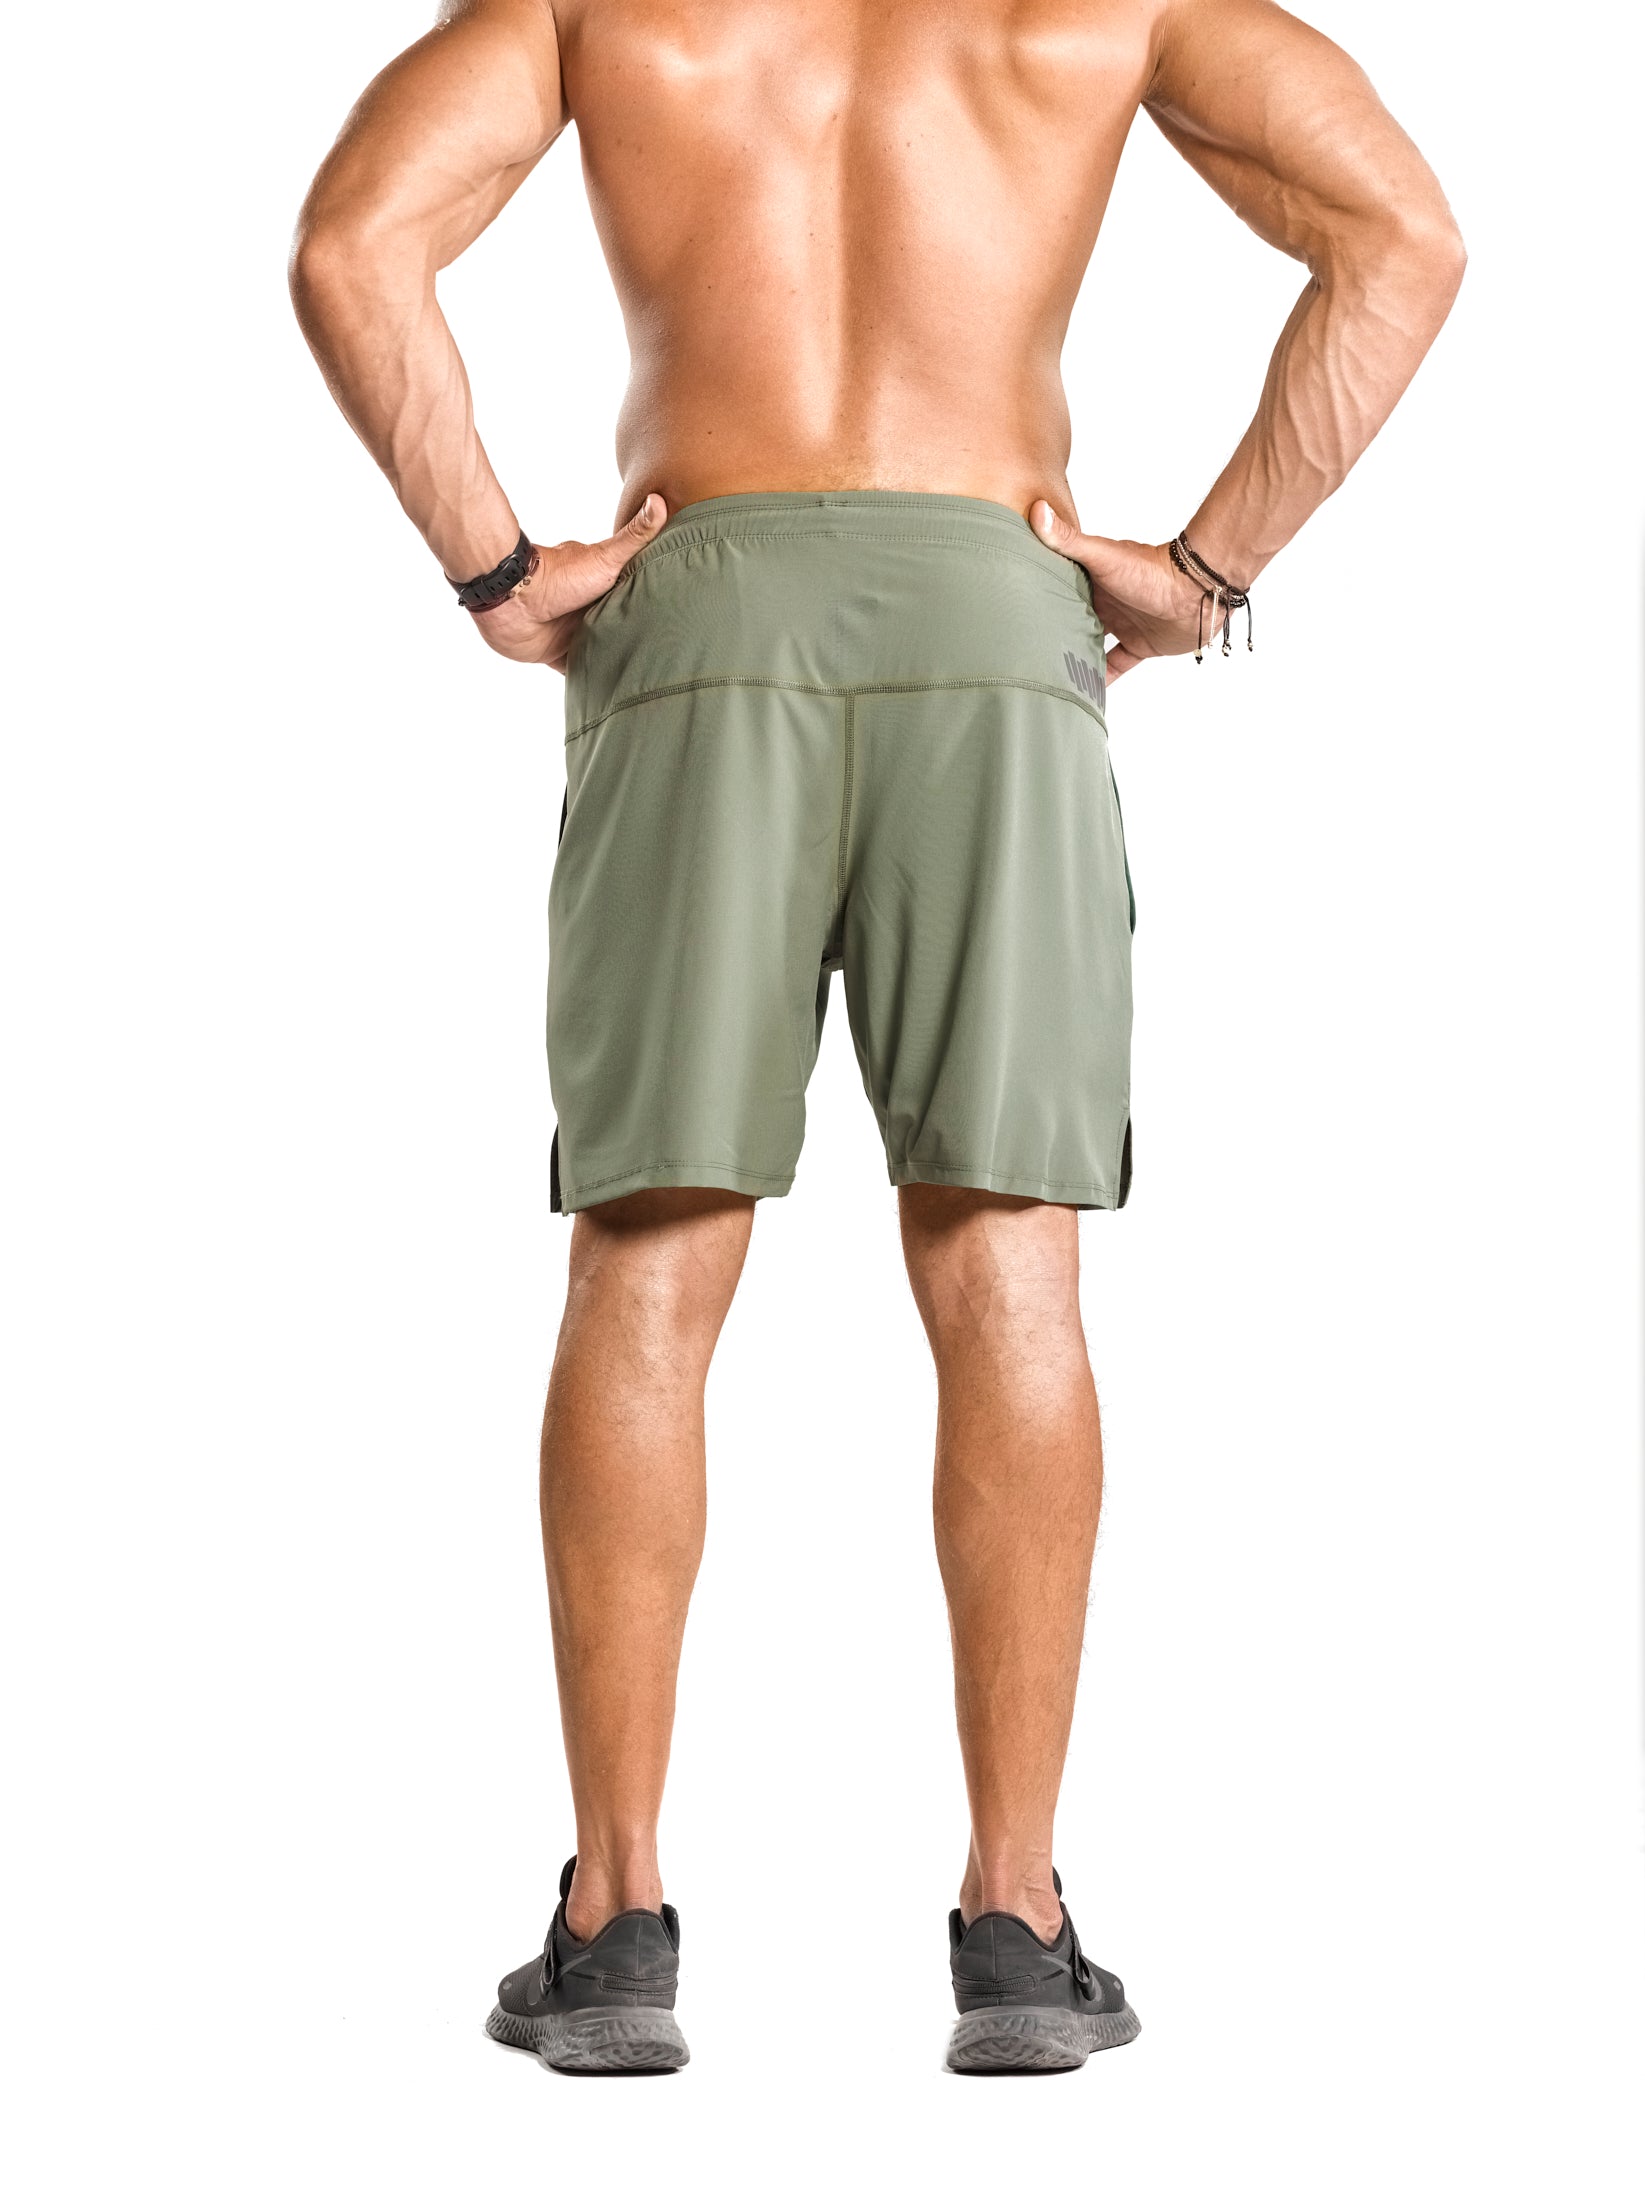 Featherweight Training Shorts [Olive Green] - Shorts - Gym Apparel Egypt